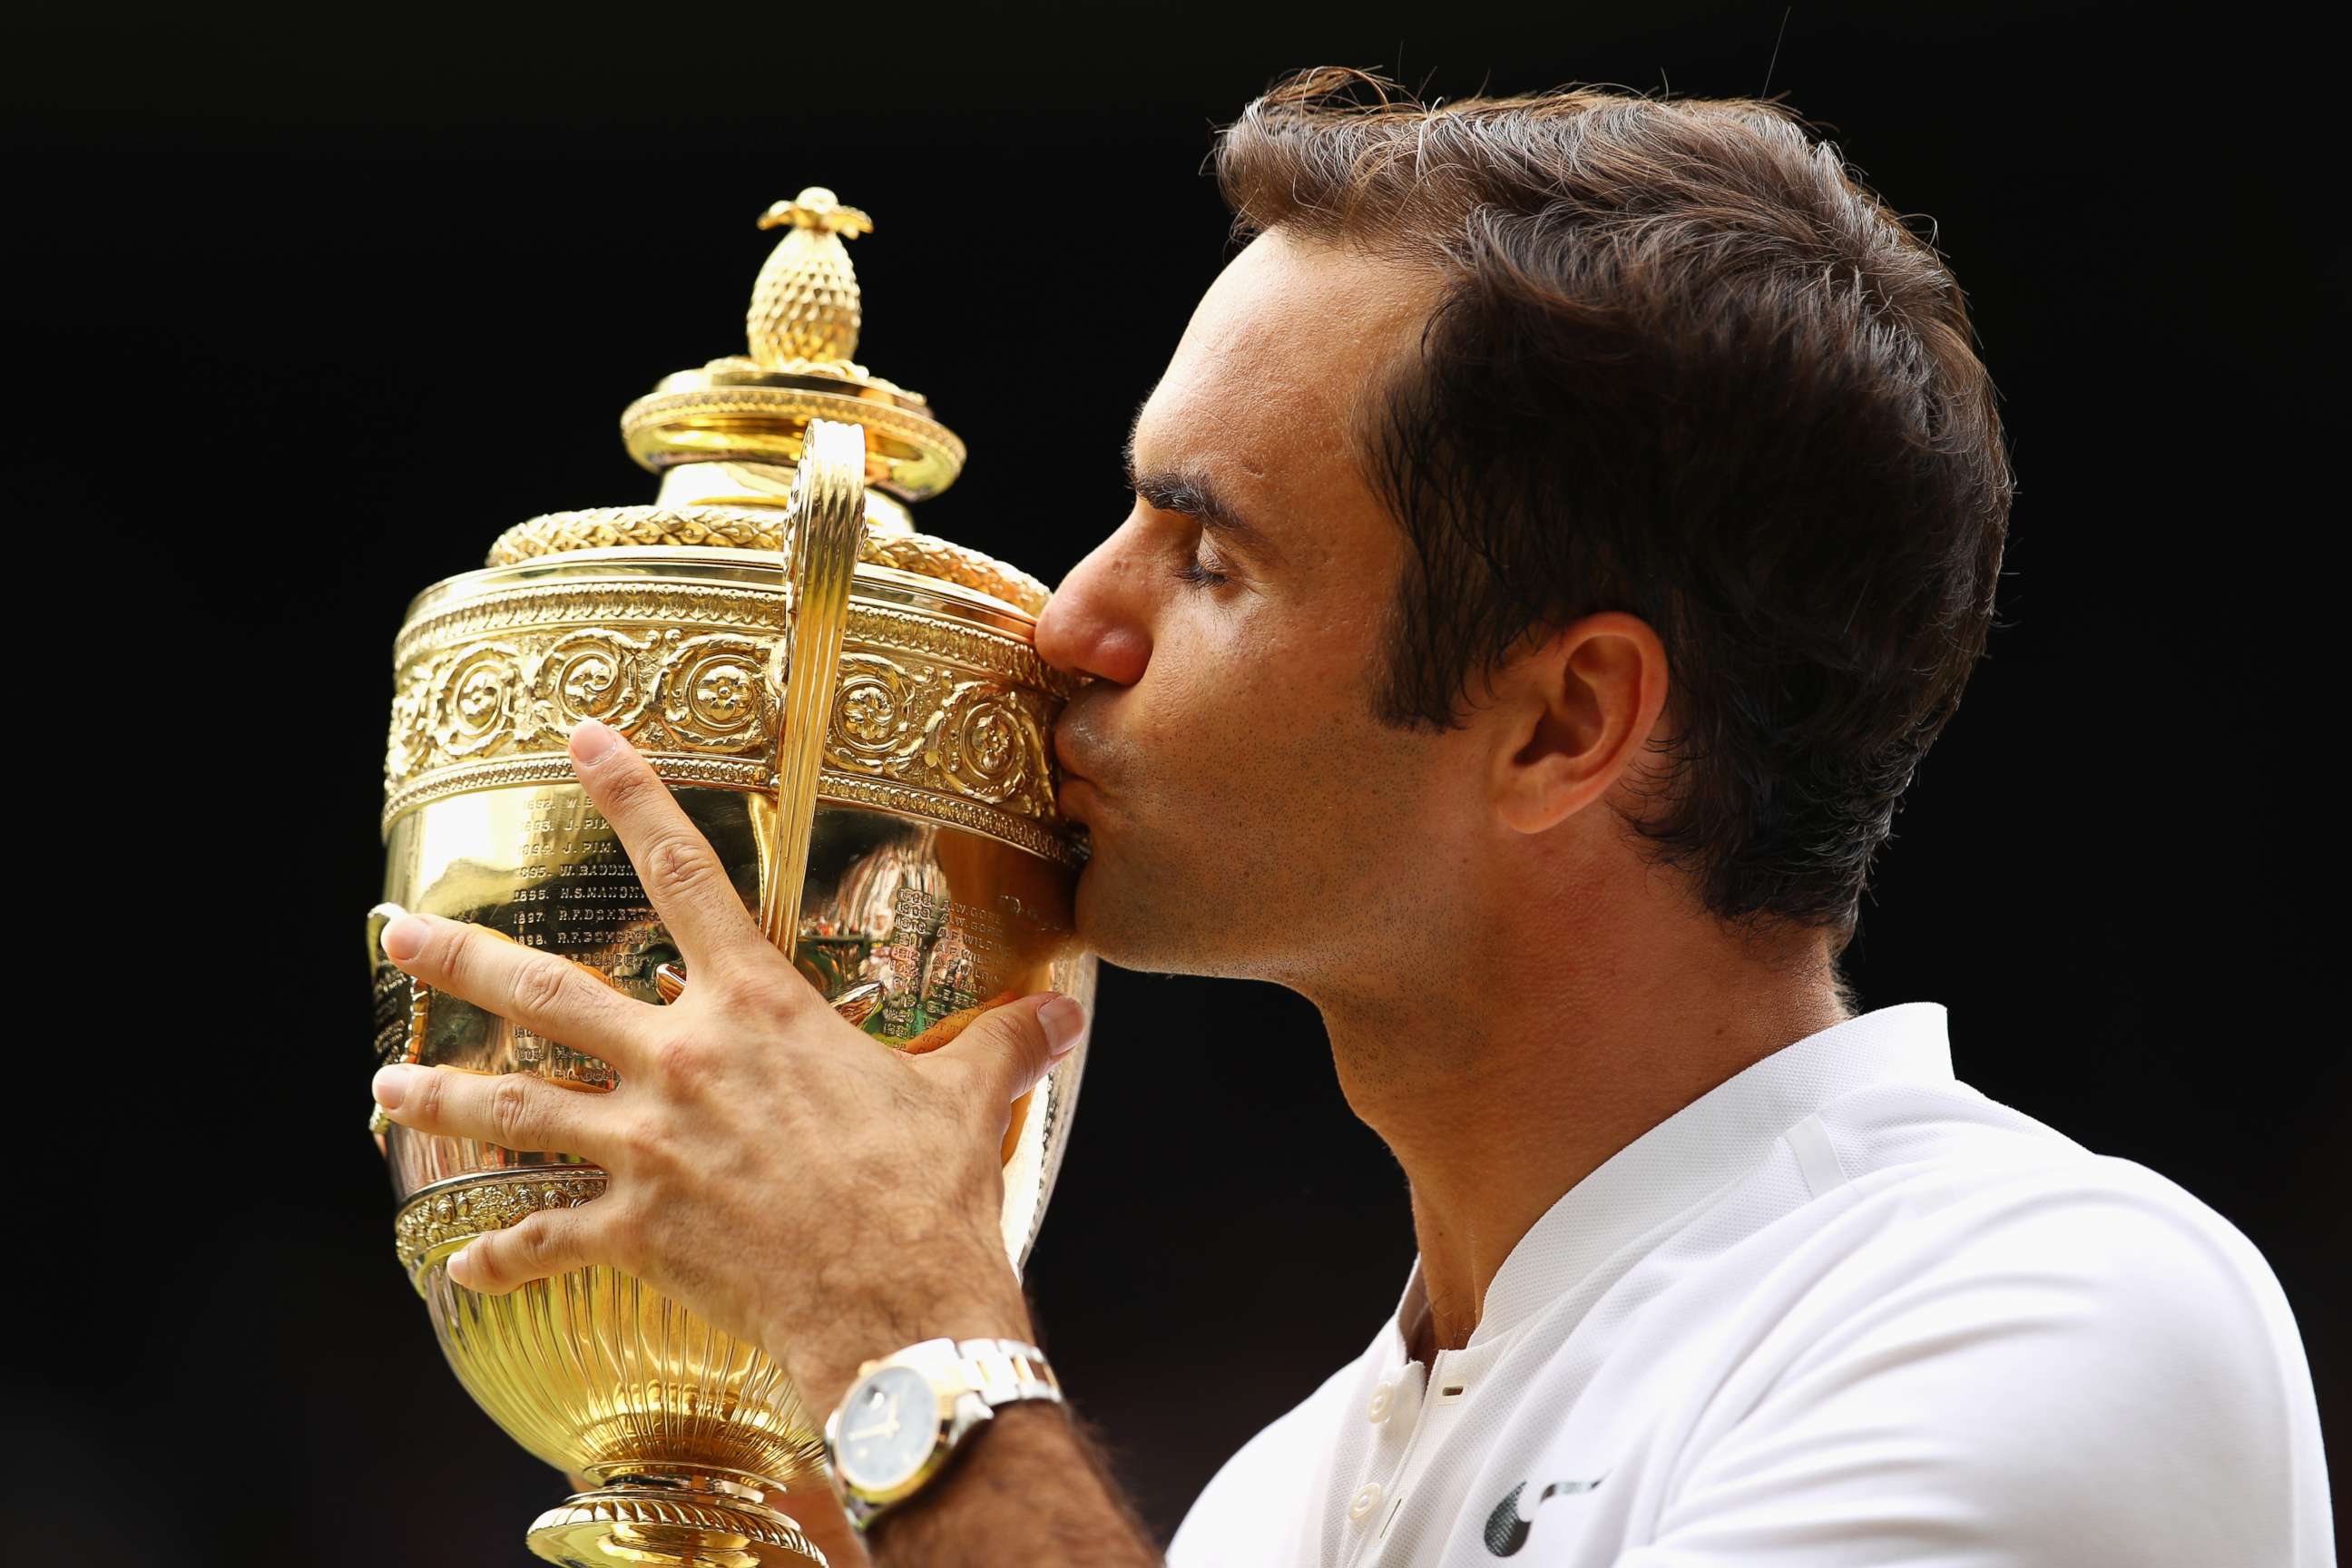 PHOTO: Roger Federer of Switzerland kisses the trophy after winning the Wimbledon men's tennis championship, July 16, 2017, in London.